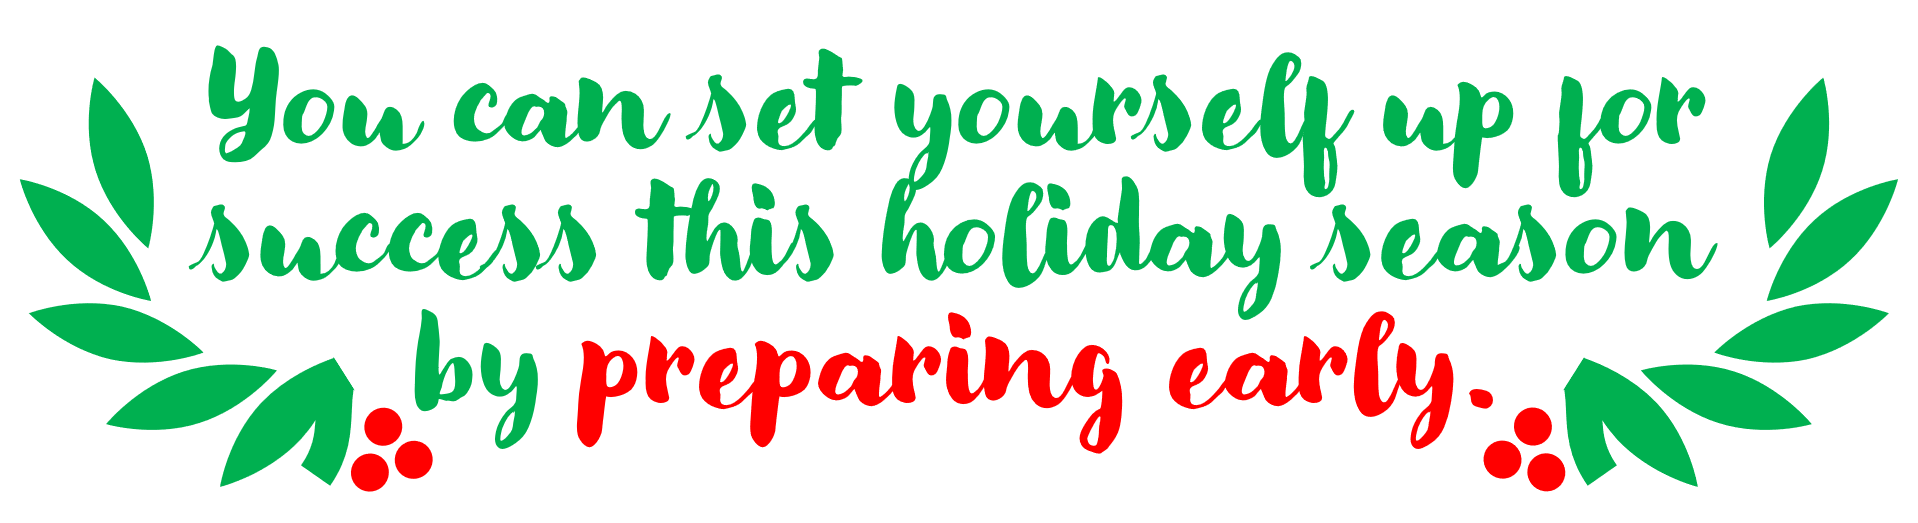 You can set yourself up for success this holiday season by preparing early.